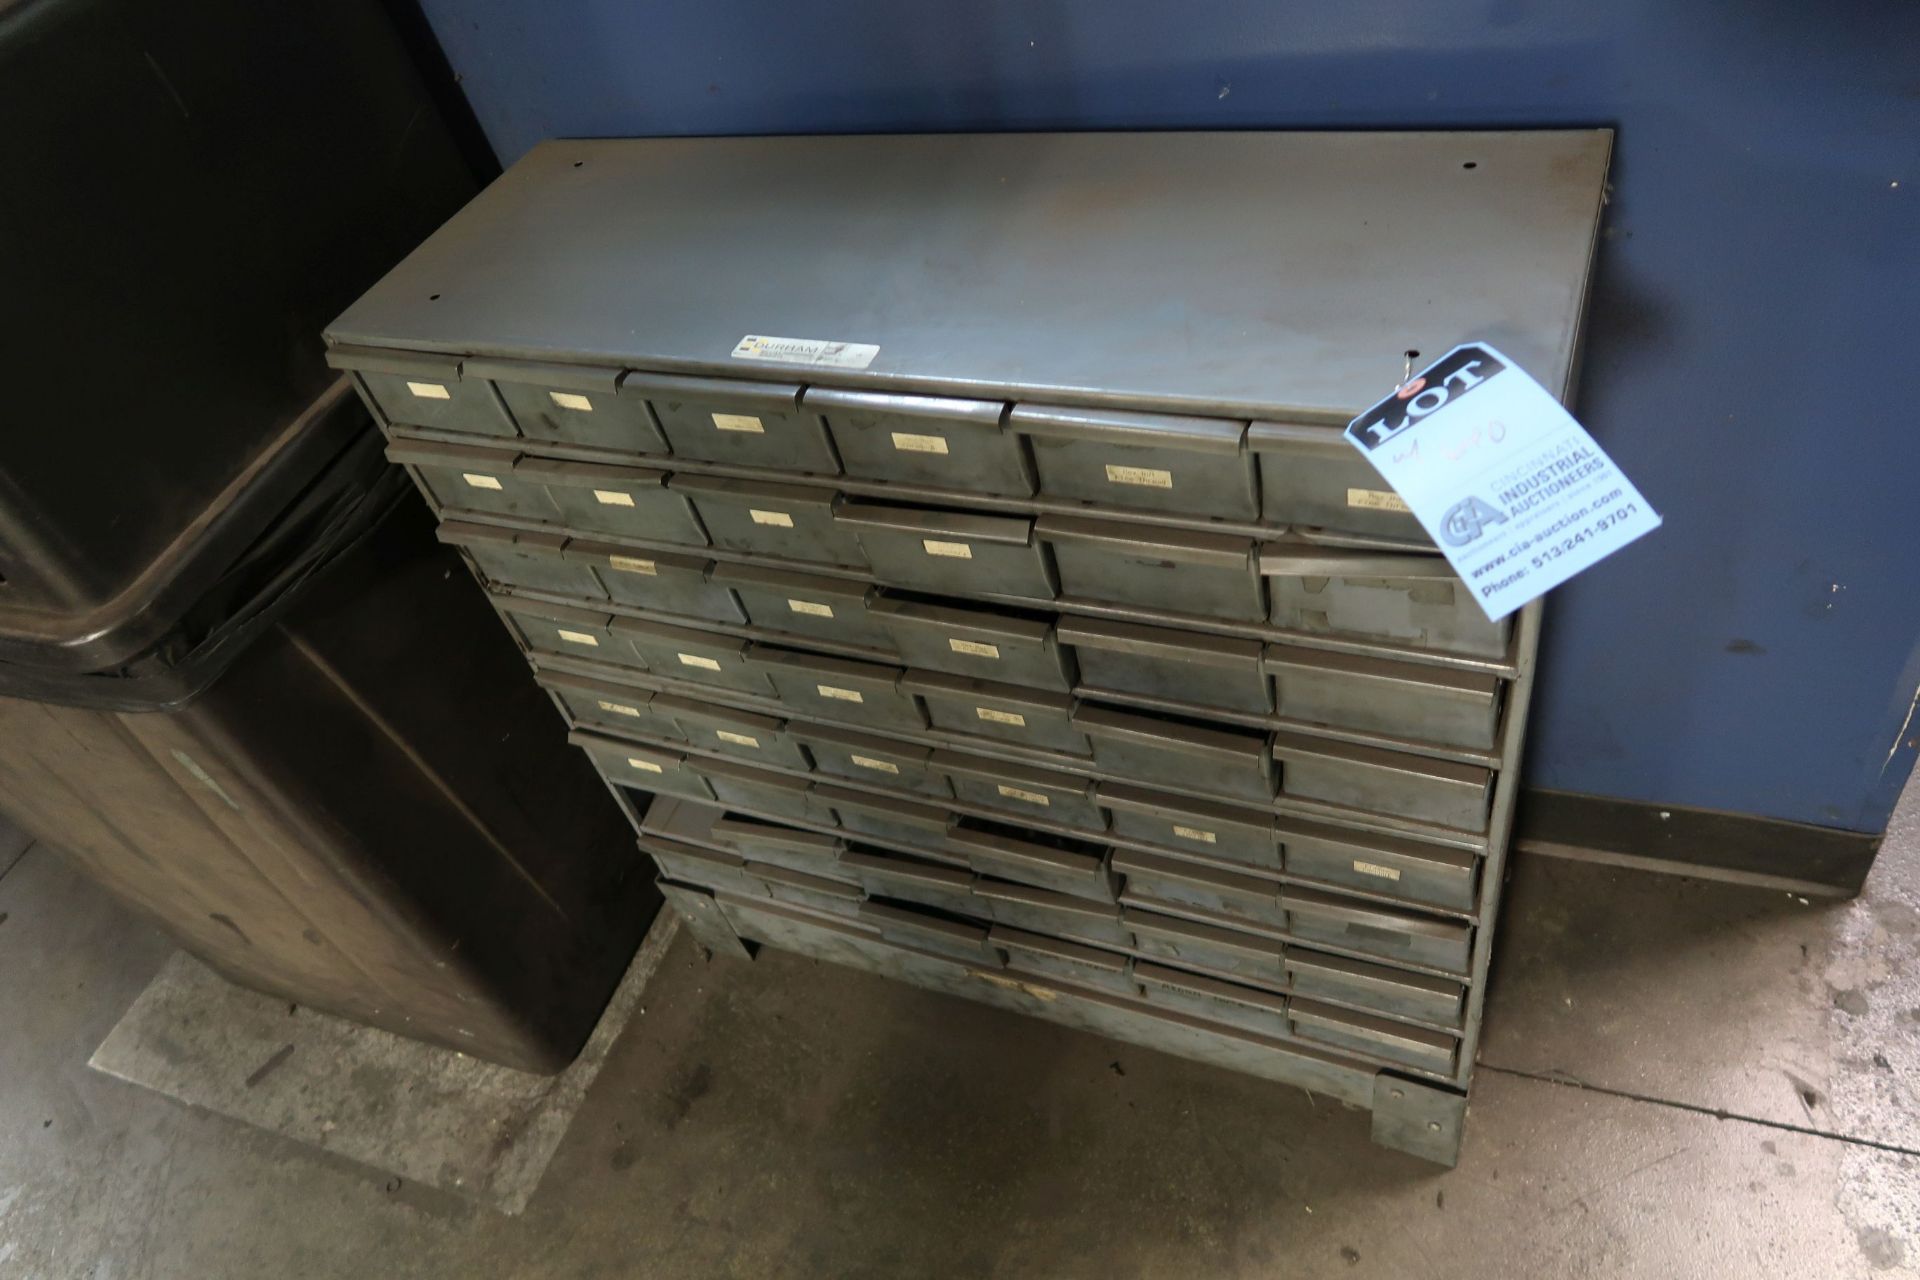 CABINETS WITH HARDWARE **LOADING PRICE DUE TO ERRA - $100.00** - Image 2 of 6